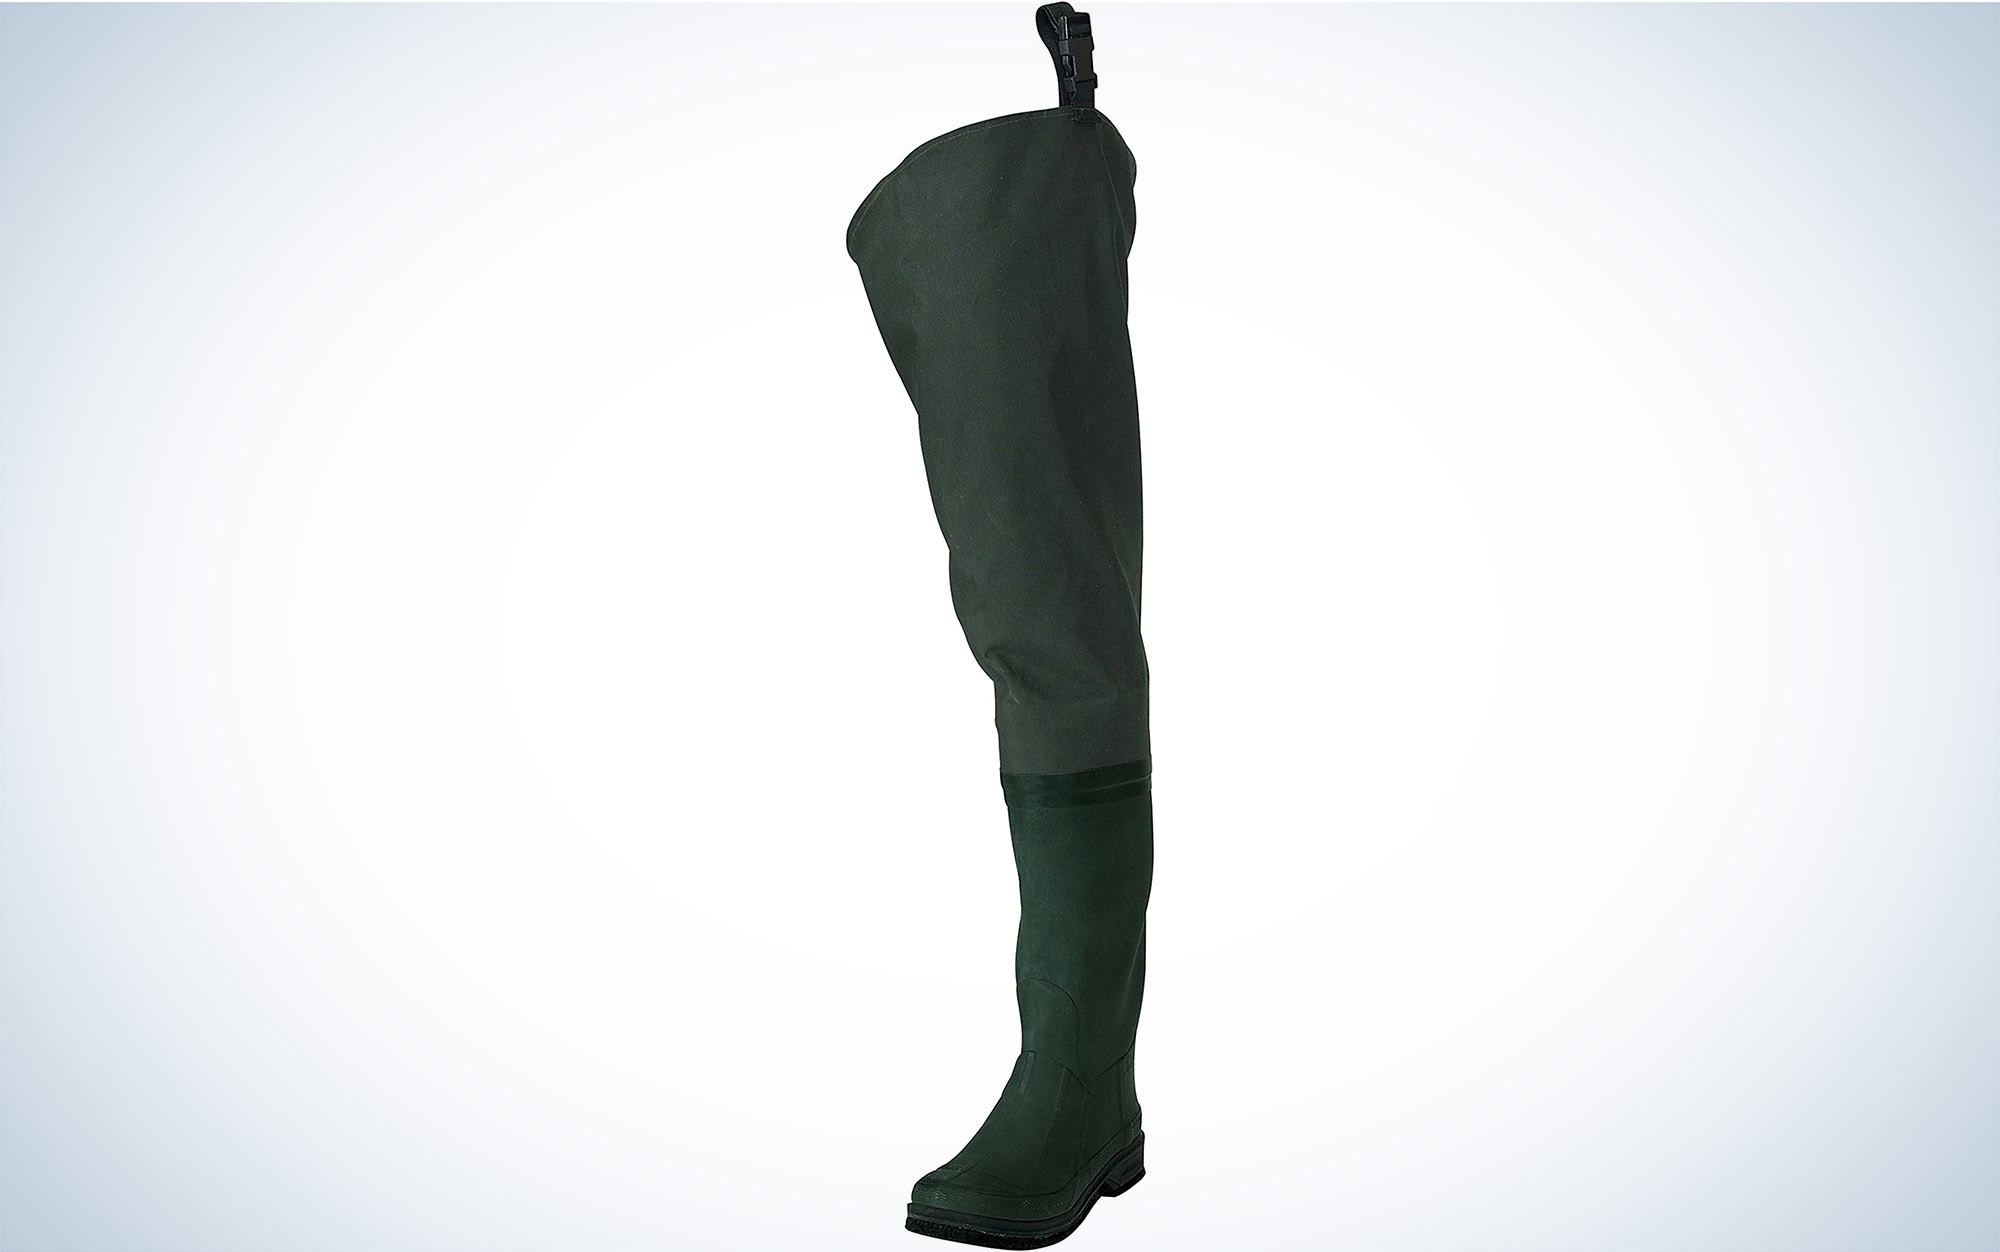 We reviewed the Frogg Toggs Cascade Elite Cleated Hip Waders.